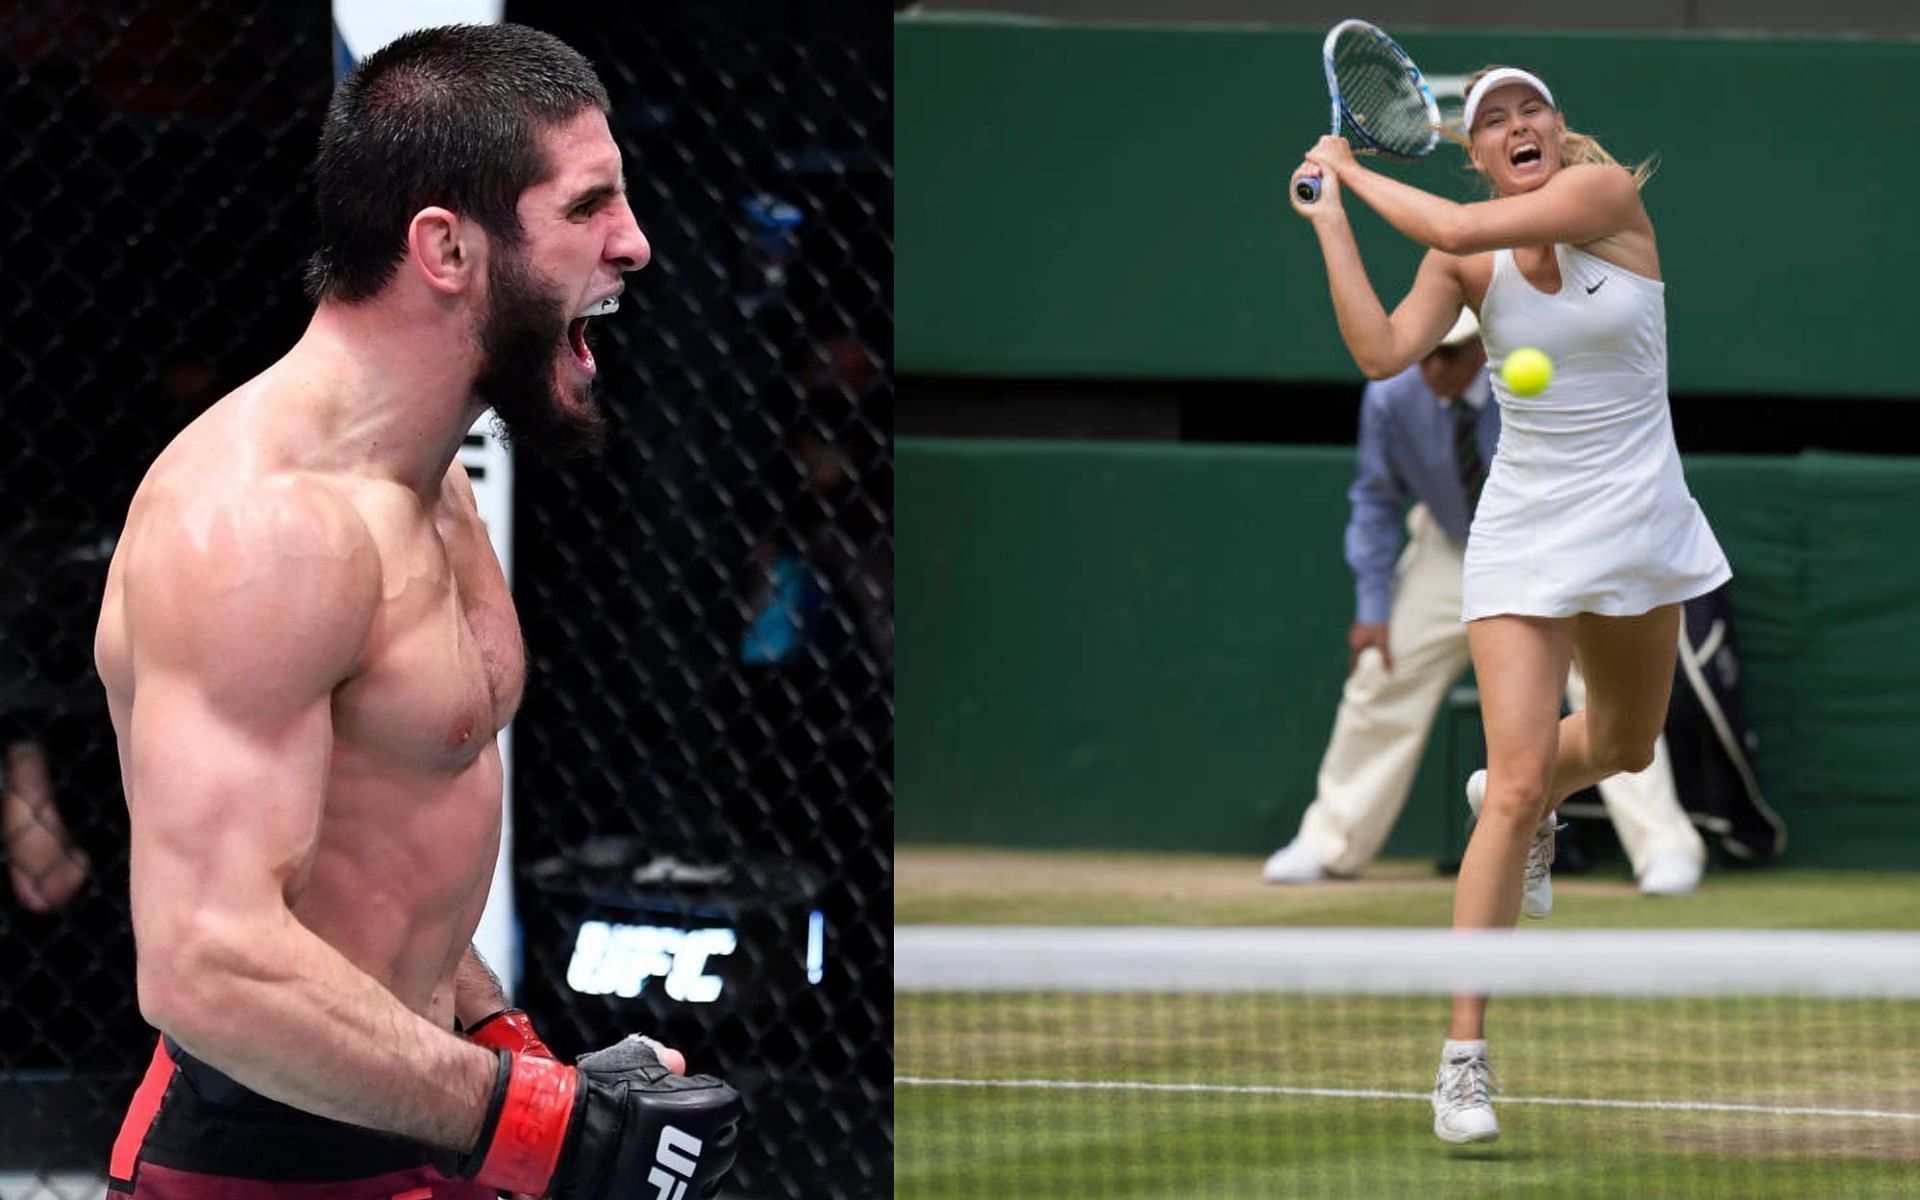 Islam Makhachev [left] and Maria Sharapova [right] [ Credits:@islam_makhachev/Instagram, Getty Images]